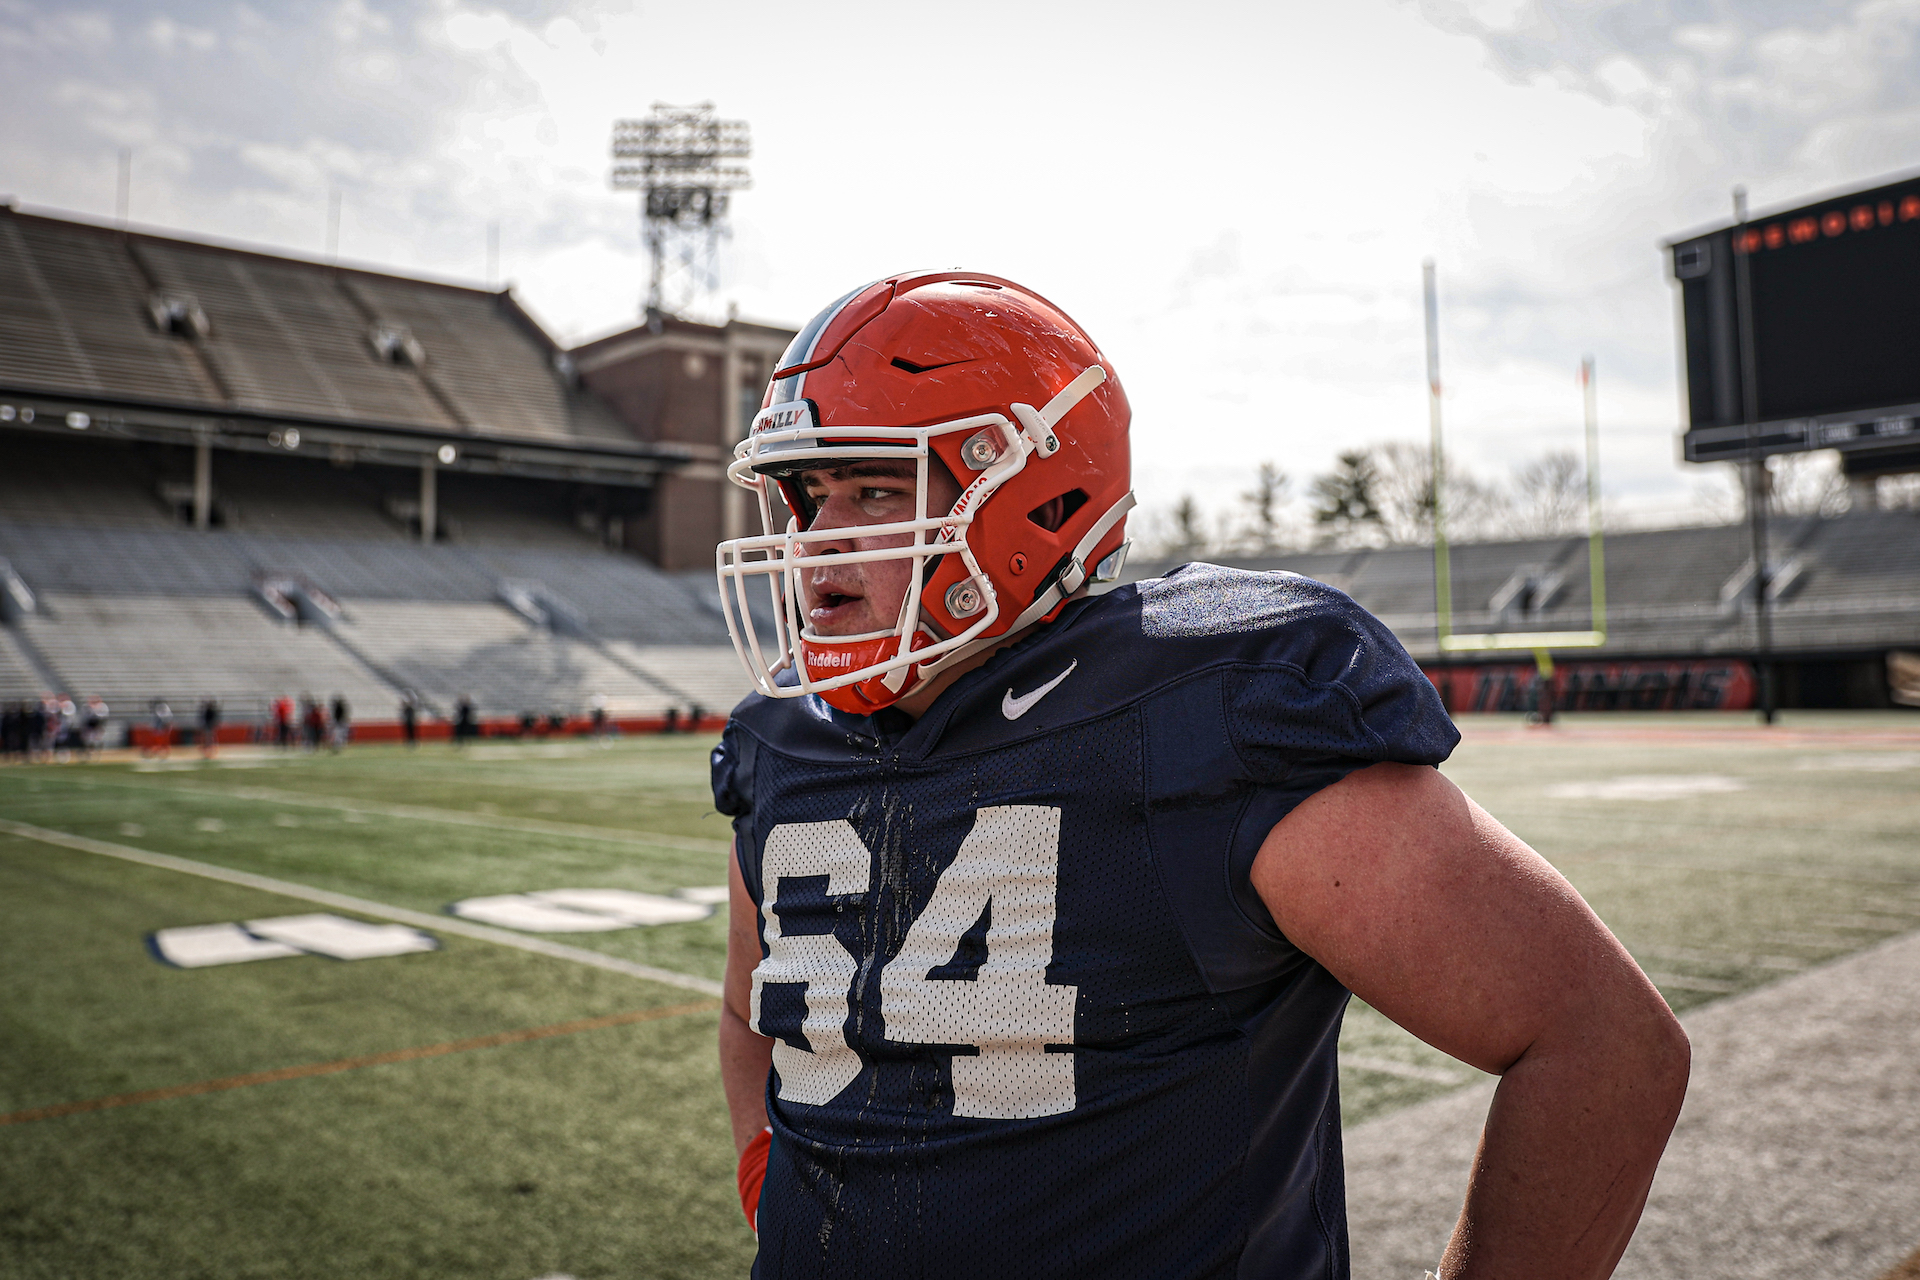 Josh Kreutz On His Opportunity to Be Bielema’s Next Impressive Center: “Nothing Really Crazy”